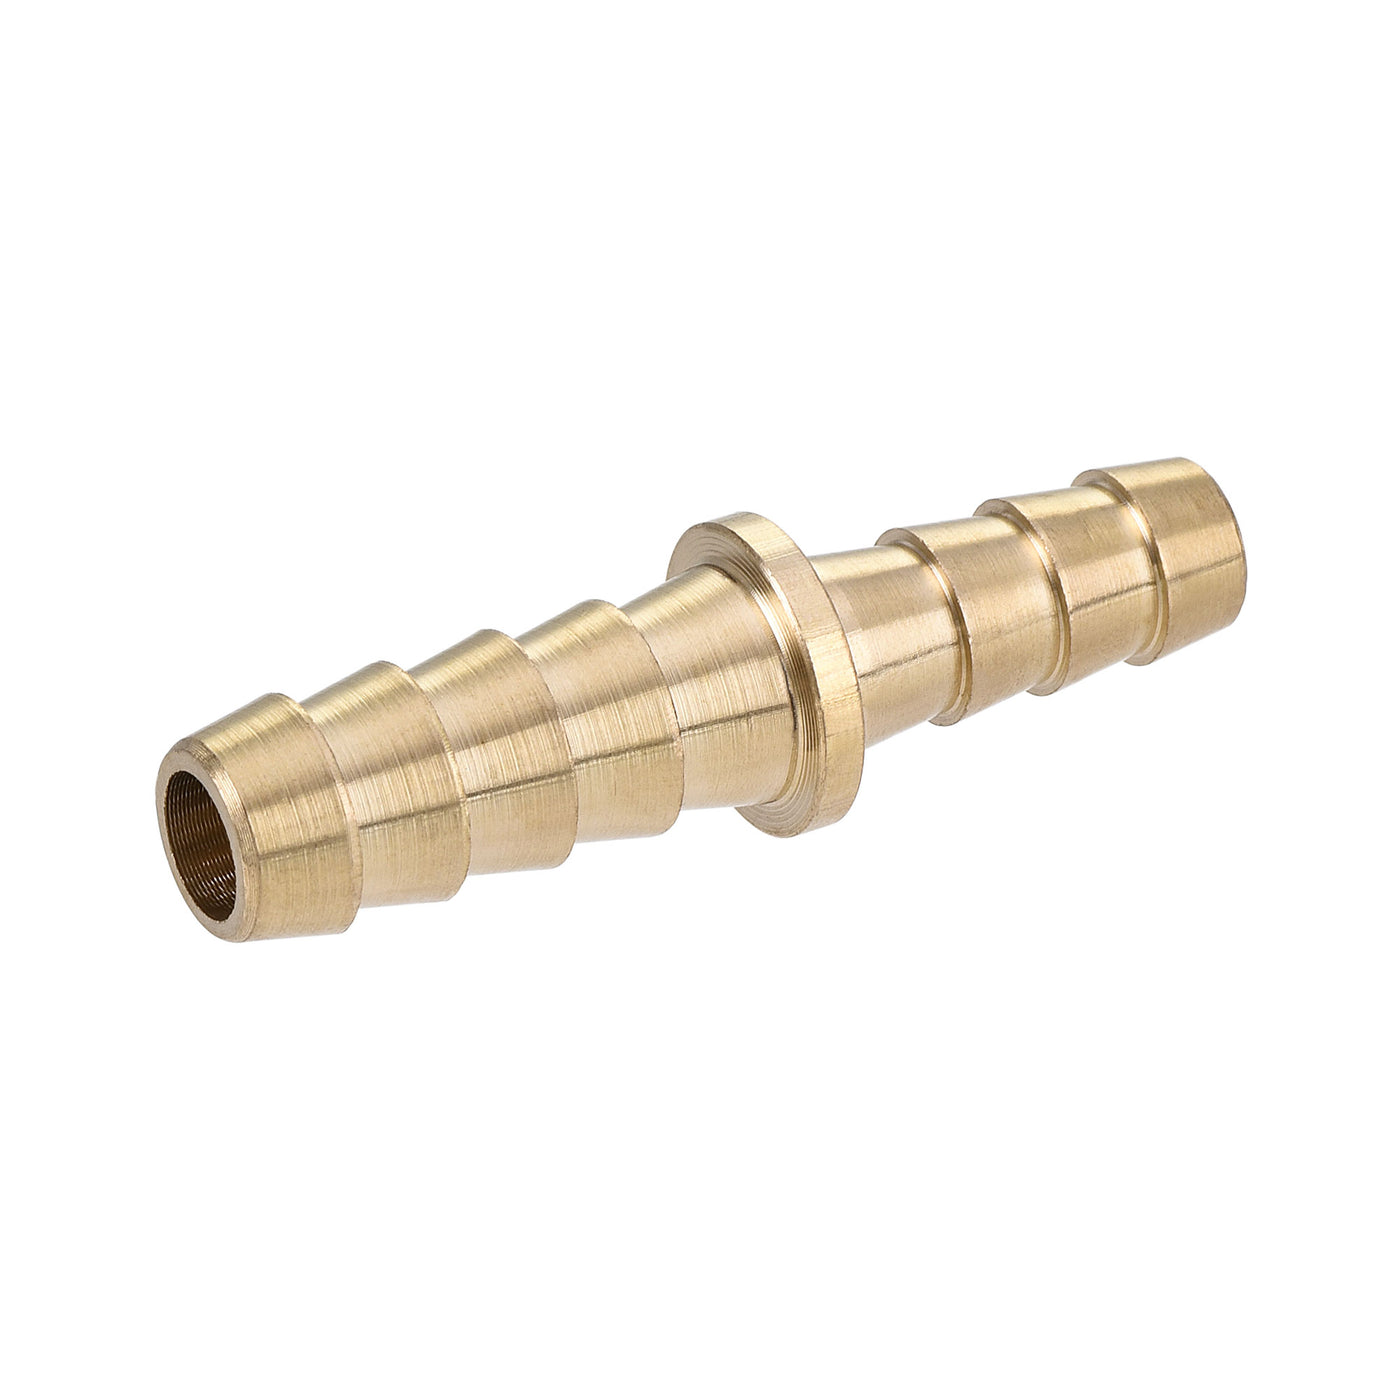 uxcell Uxcell Hose Barb Fitting, 5/16x1/4inch Brass Hollow Straight Quick Connector for Water Fuel Air Oil Gas, Pack of 2